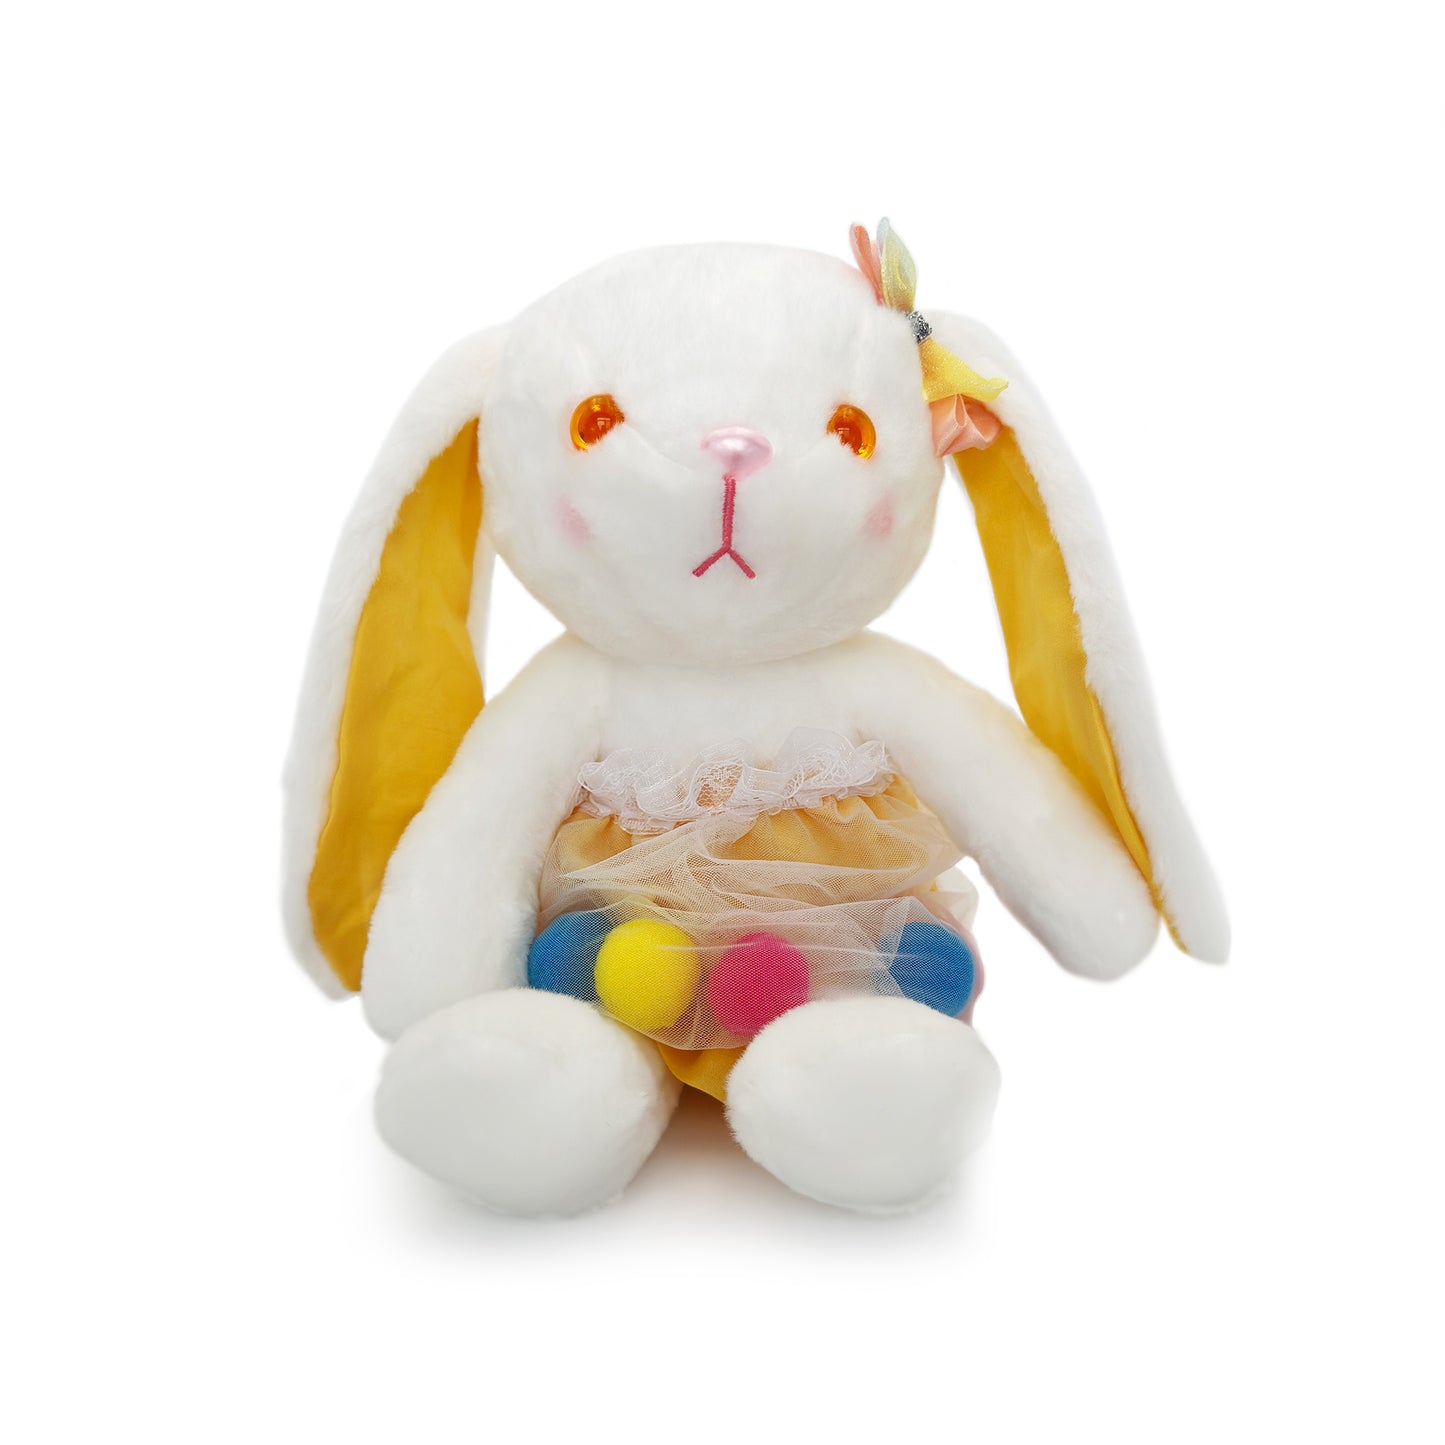 cute bunny in a yellow dress lovely stuffed animal PlushThis